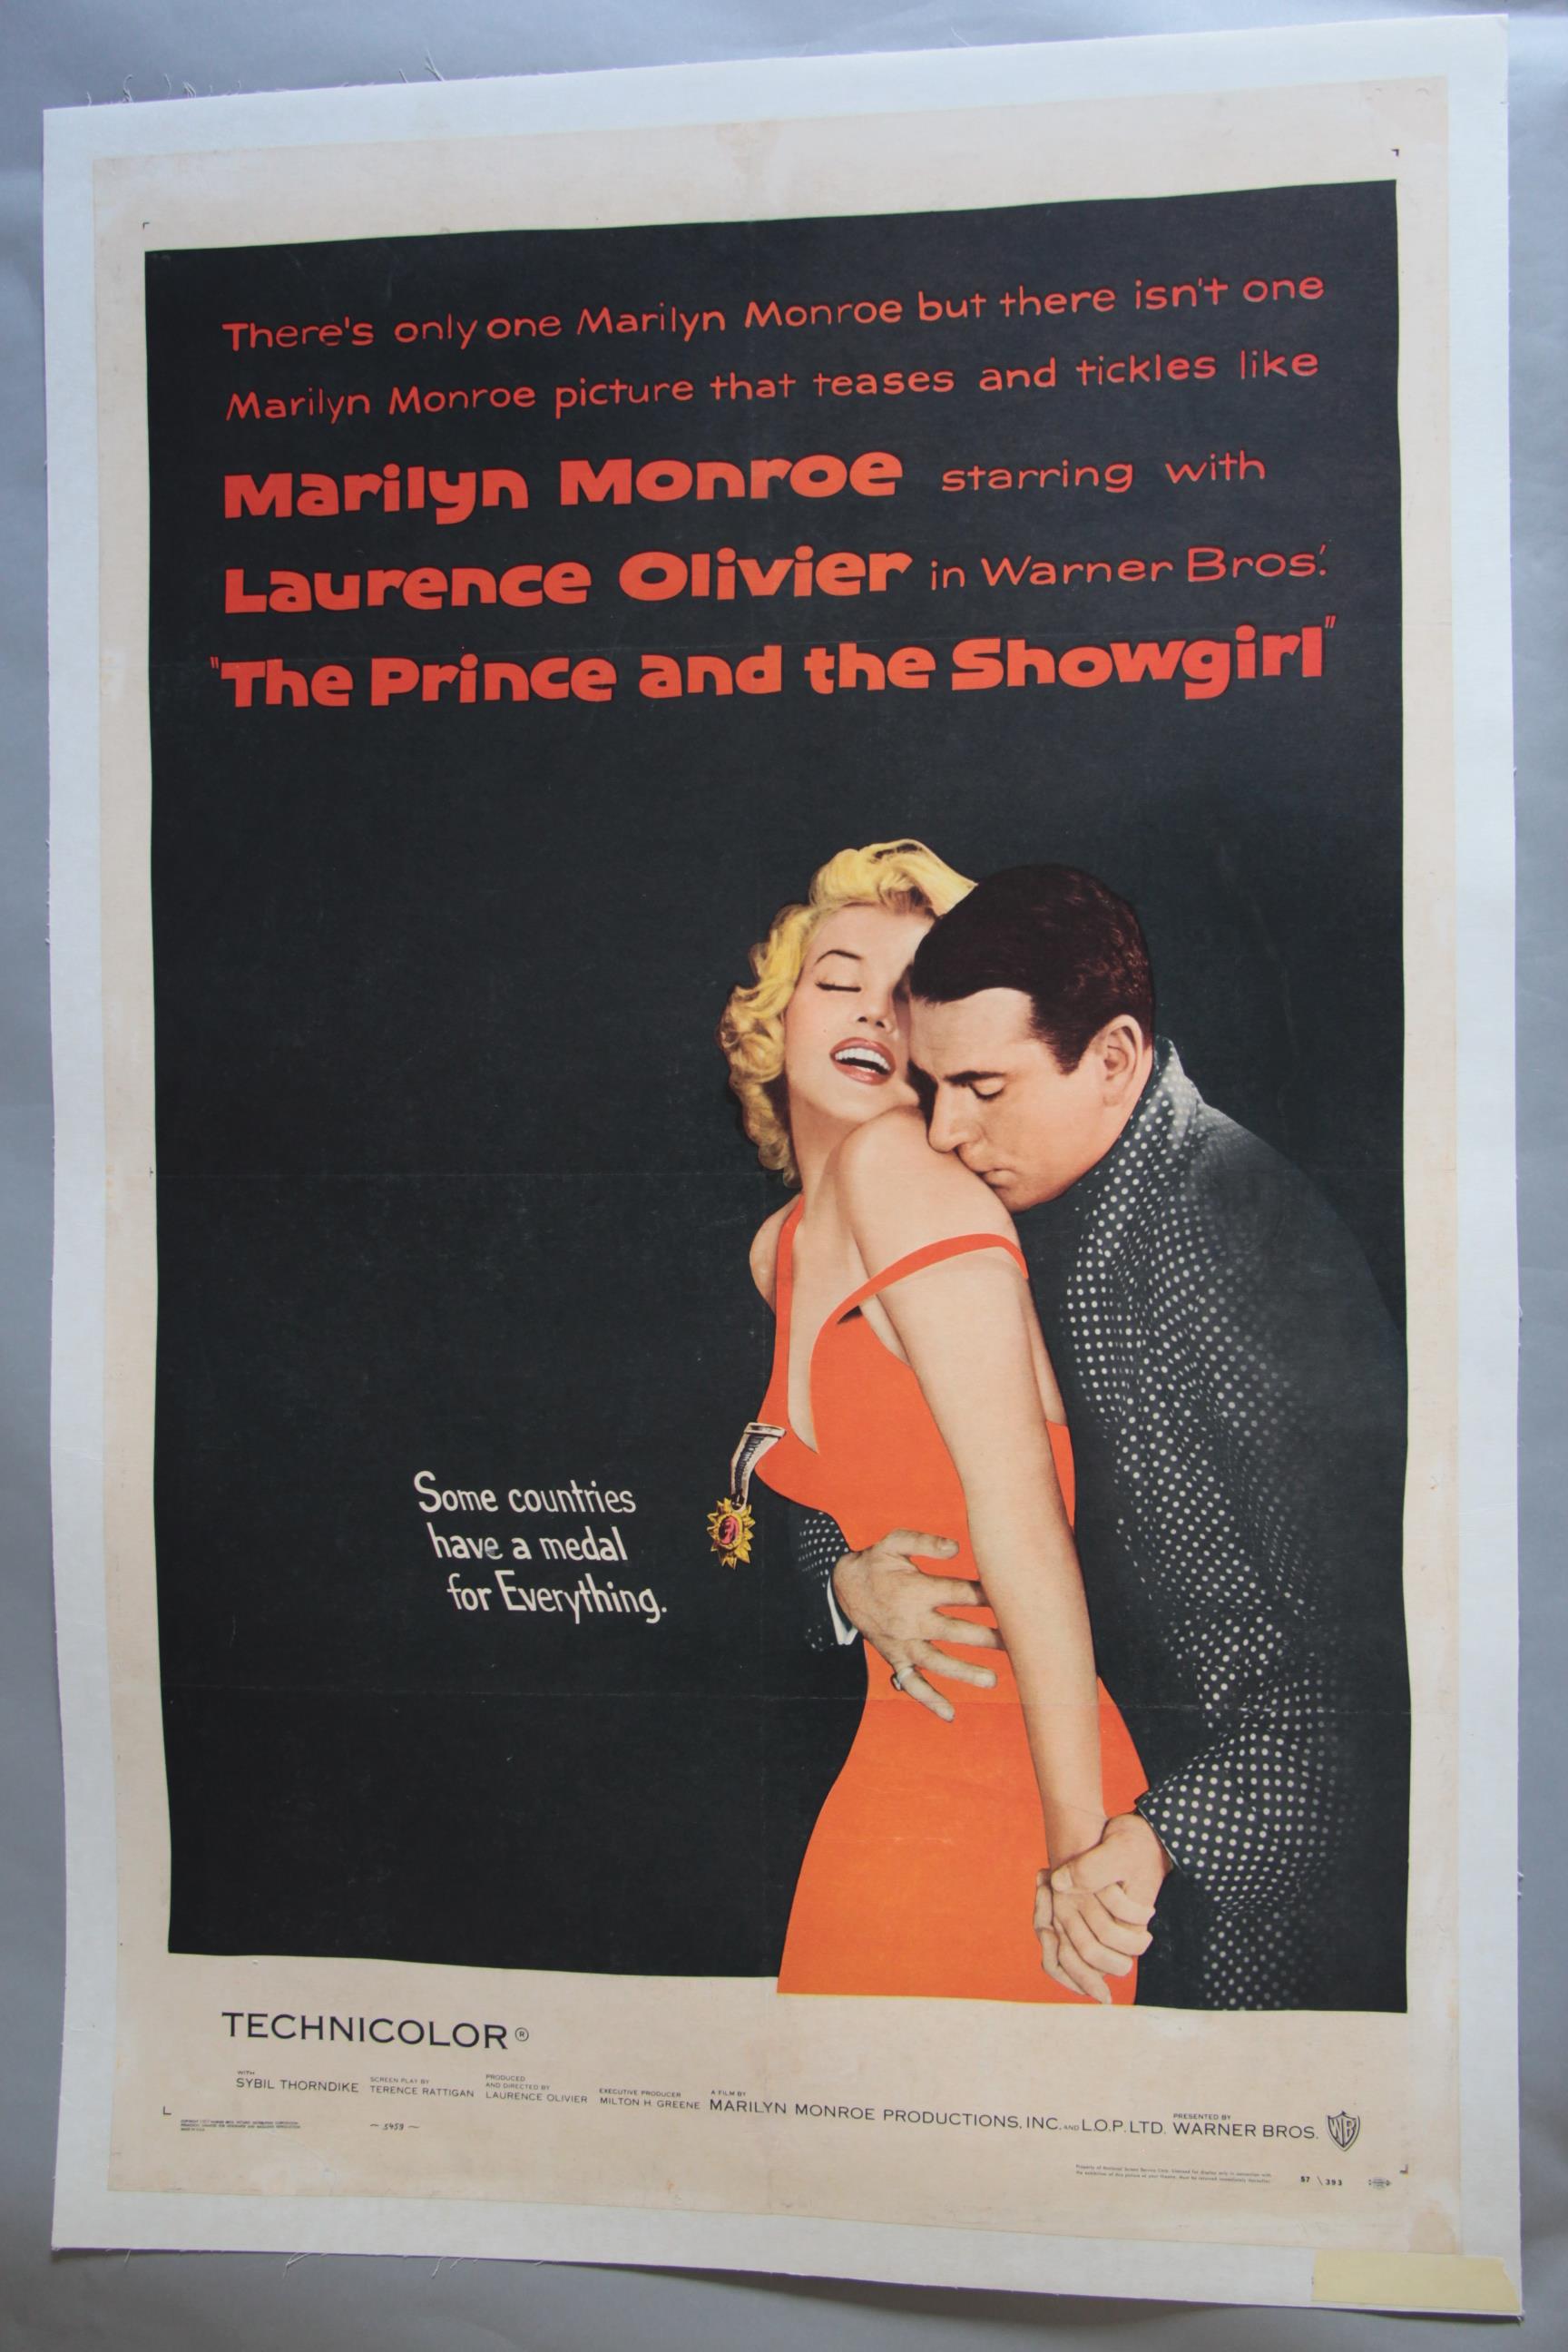 The Prince and the Showgirl (1957) linen backed US one sheet picturing Marilyn Monroe and Laurence